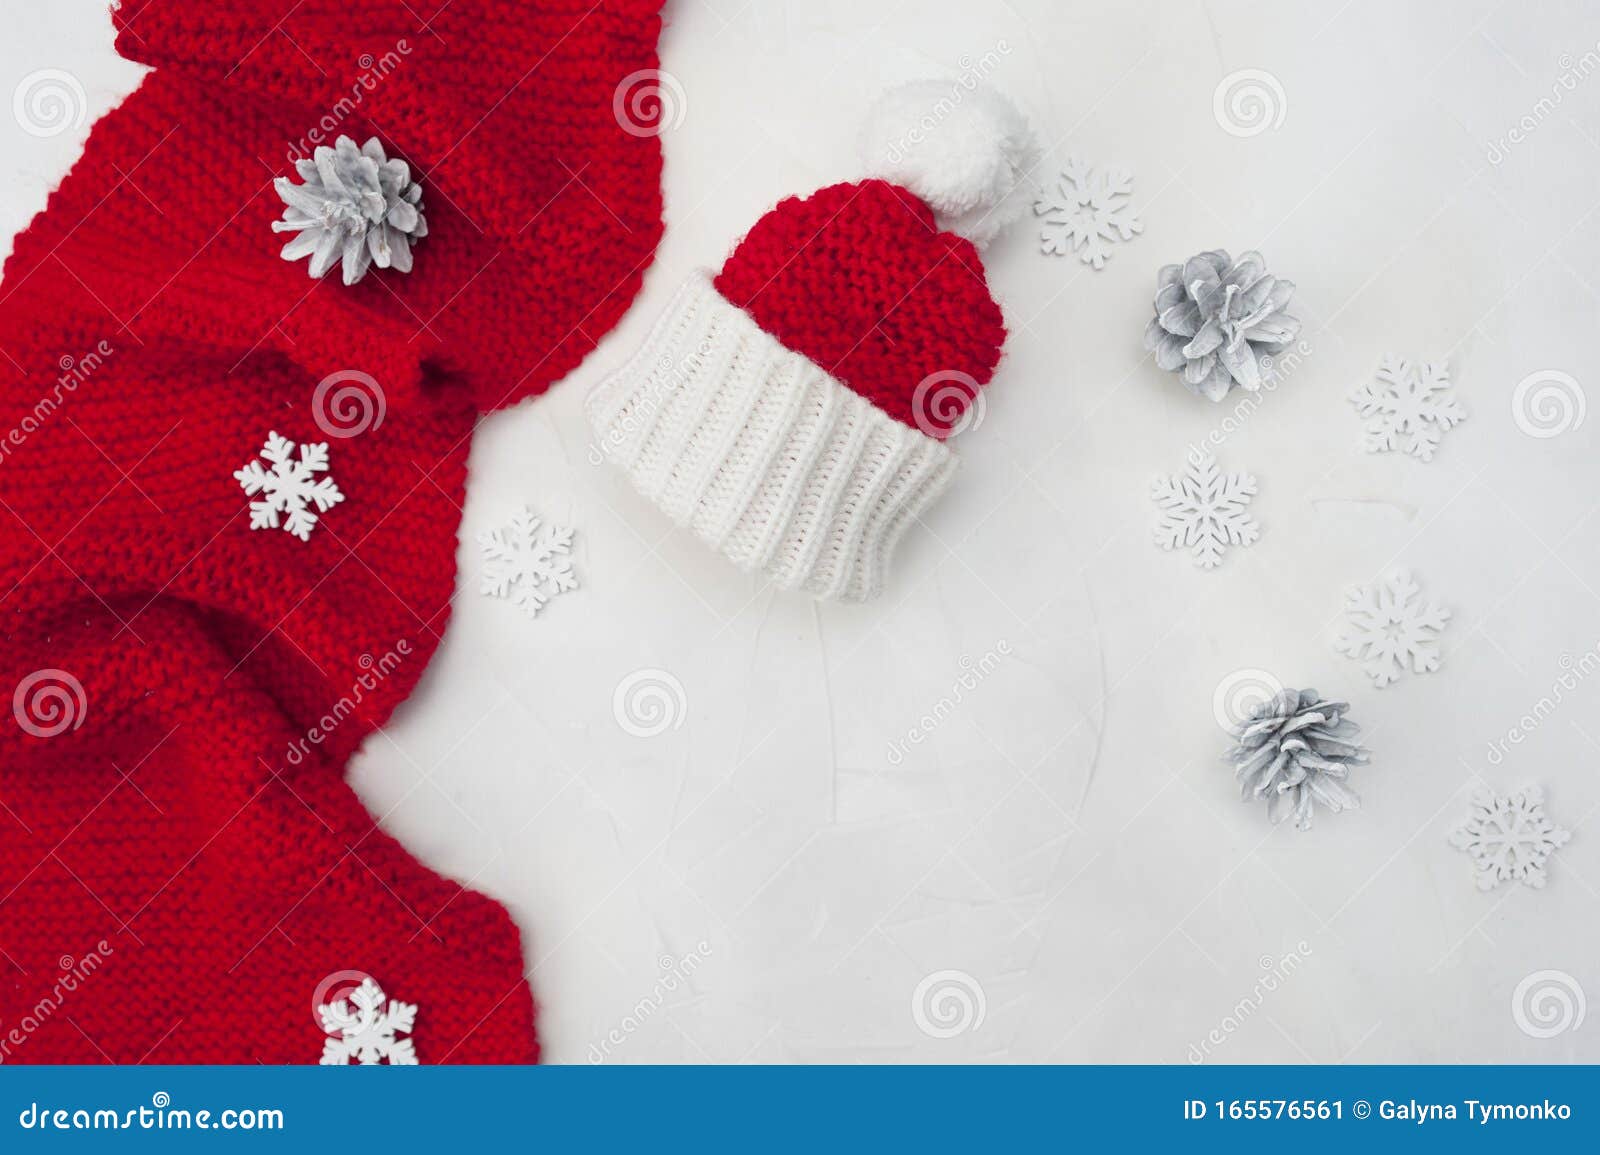 Download Christmas Mockup With Santa Red Scarf And Hat On Wooden ...